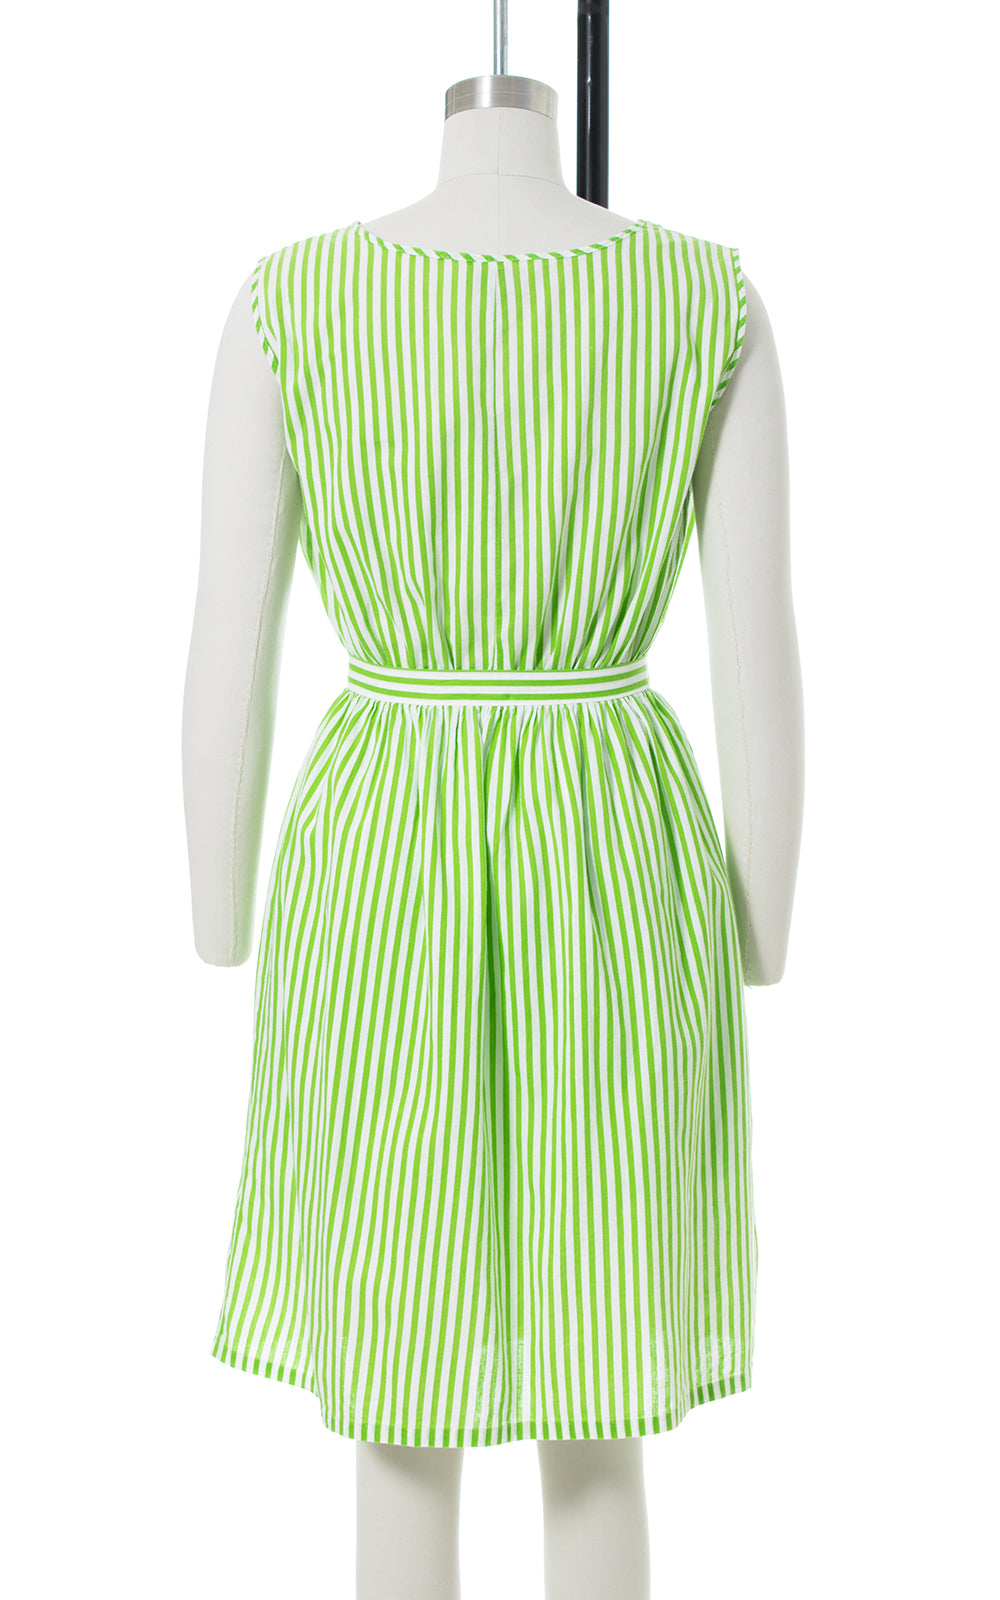 1940s 1950s Striped Cotton Romper & Skirt Playsuit